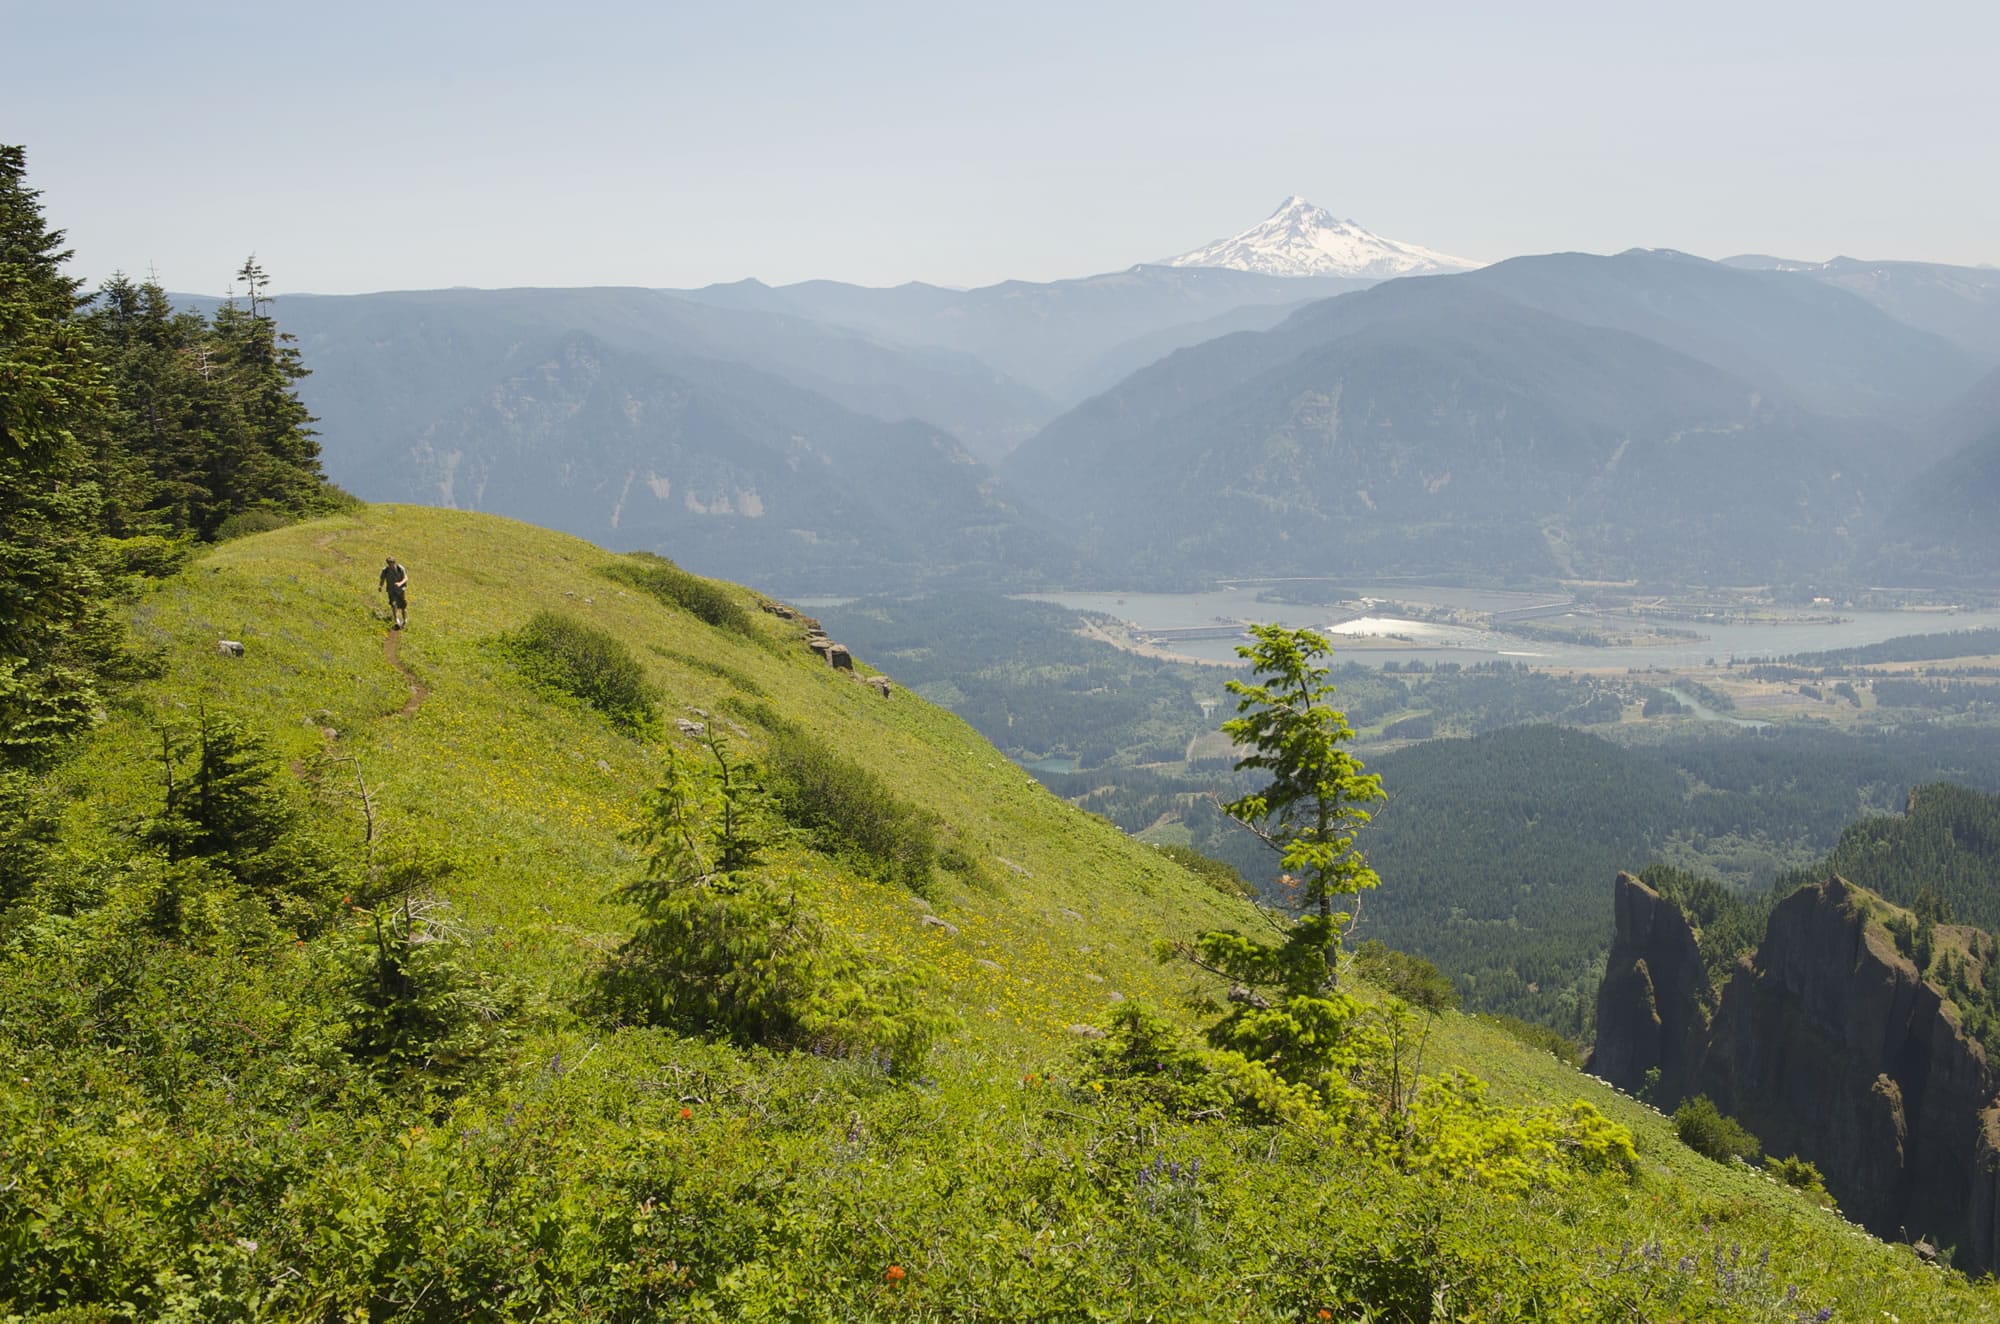 Hikers who make the steep climb to the summit of Table Mountain are rewarded with a grand view of the Columbia River Gorge.